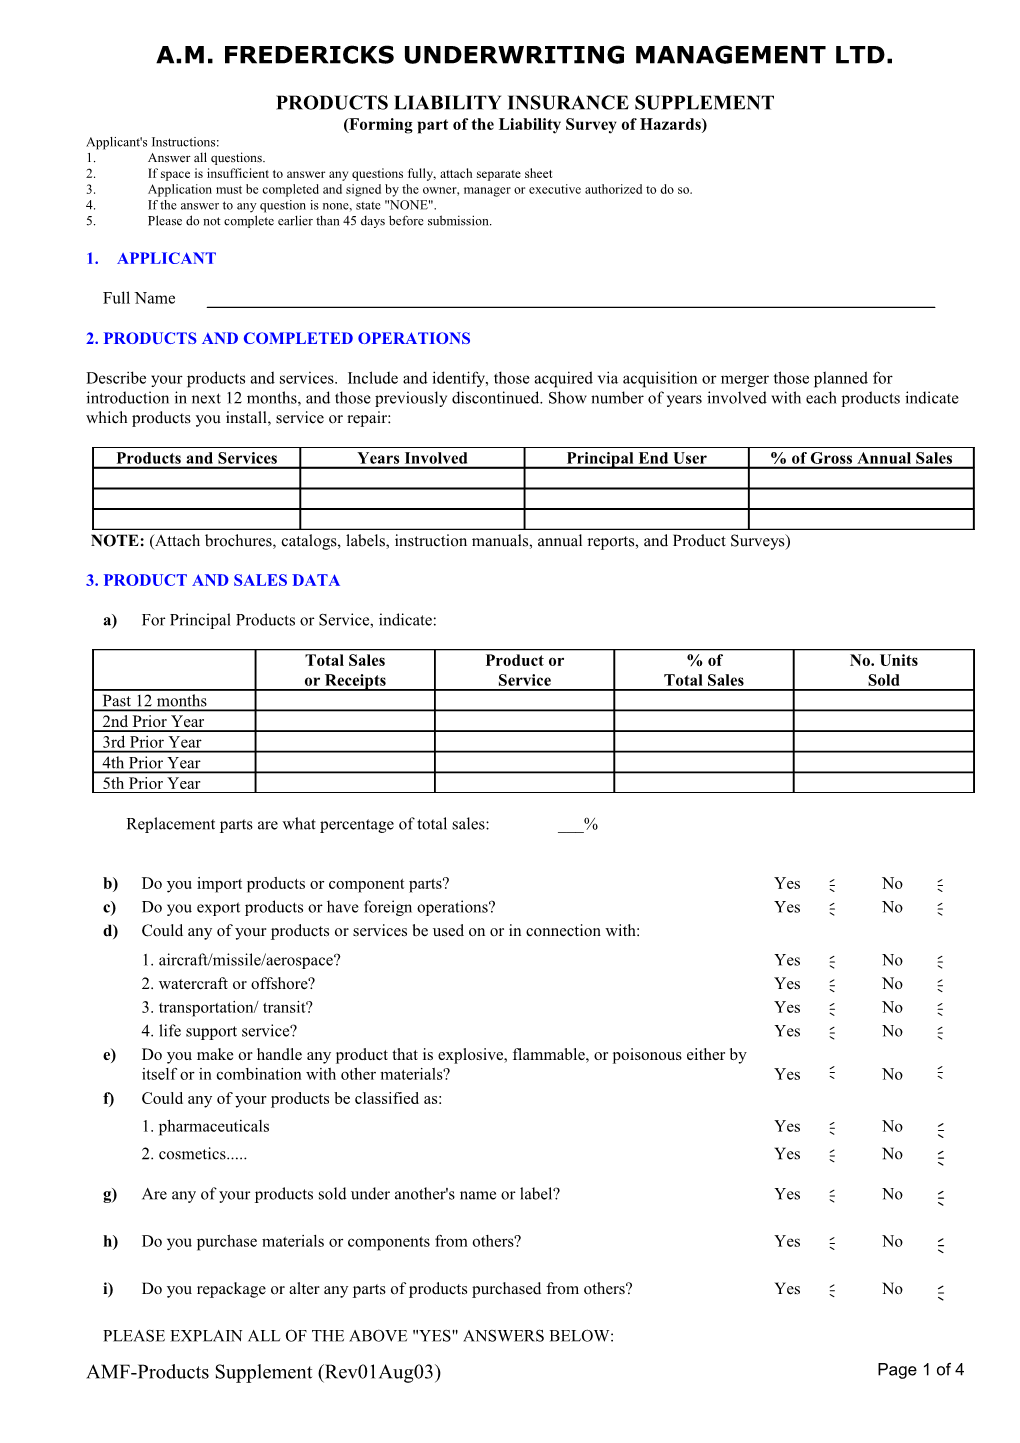 Products Liability Insurance Questionnaire